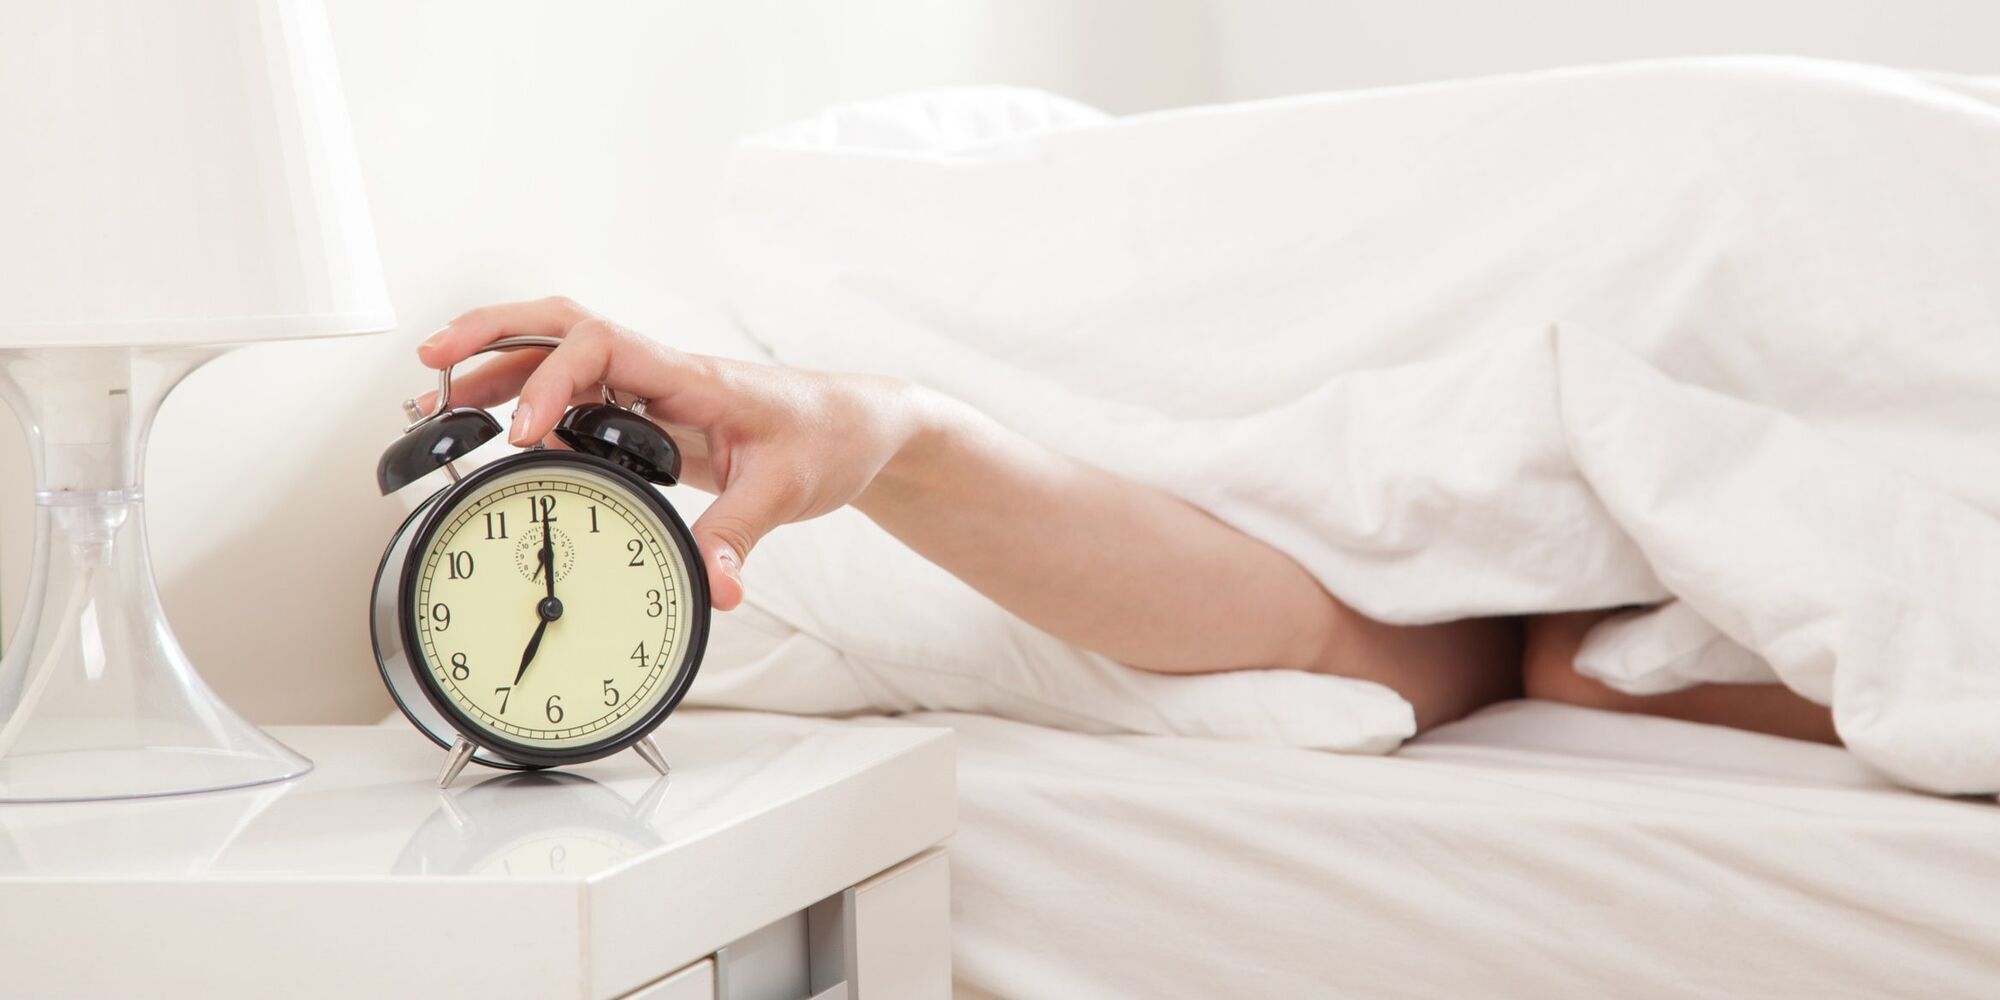 How to enjoy sleep: simple steps to a refreshing morning